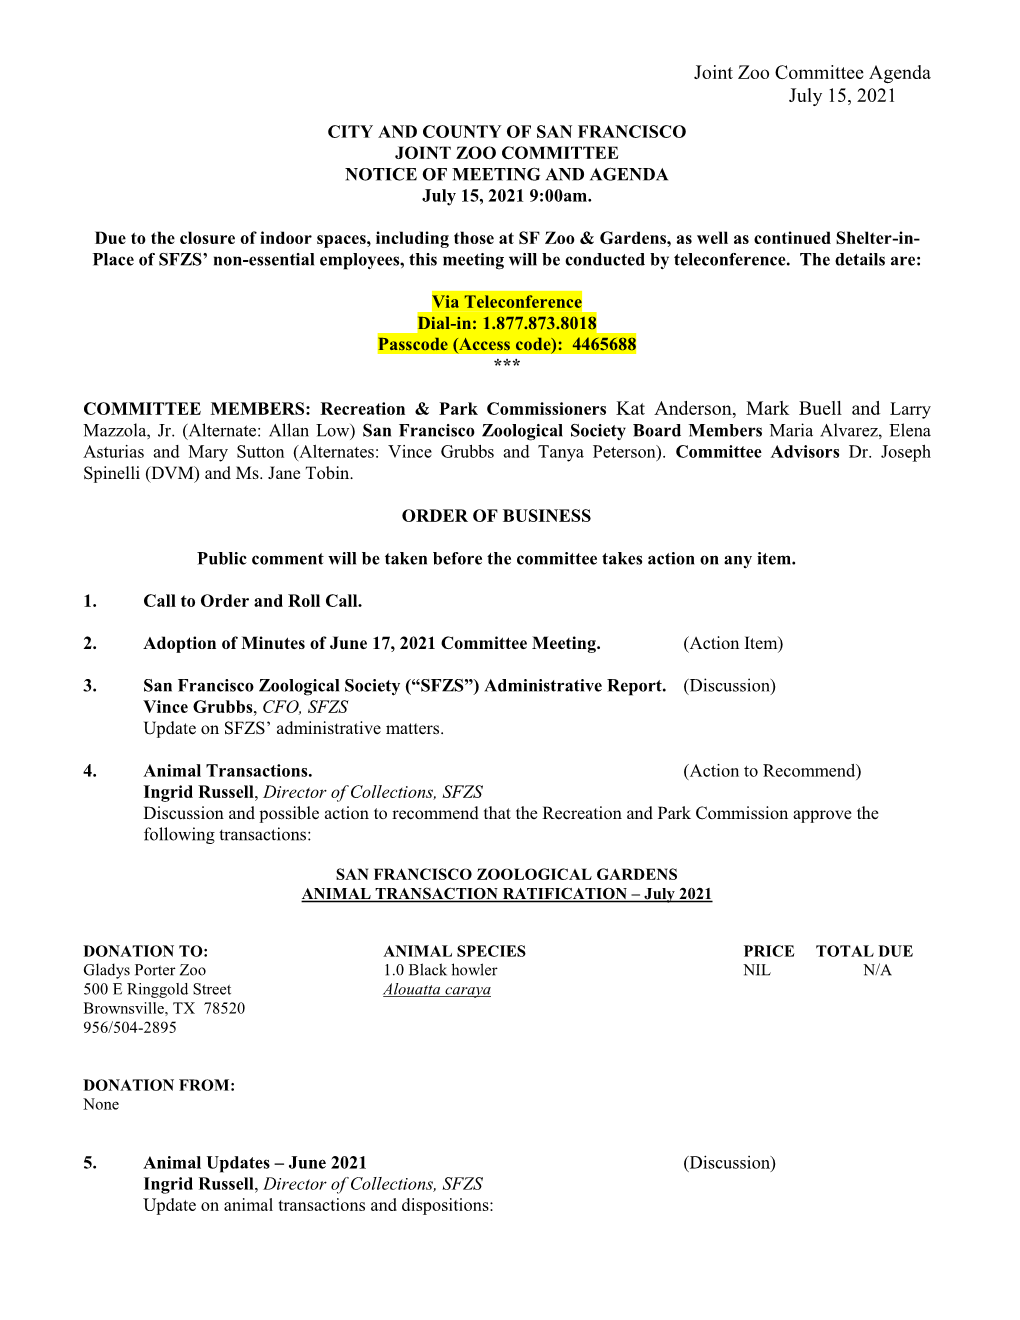 Agenda July 15, 2021 CITY and COUNTY of SAN FRANCISCO JOINT ZOO COMMITTEE NOTICE of MEETING and AGENDA July 15, 2021 9:00Am